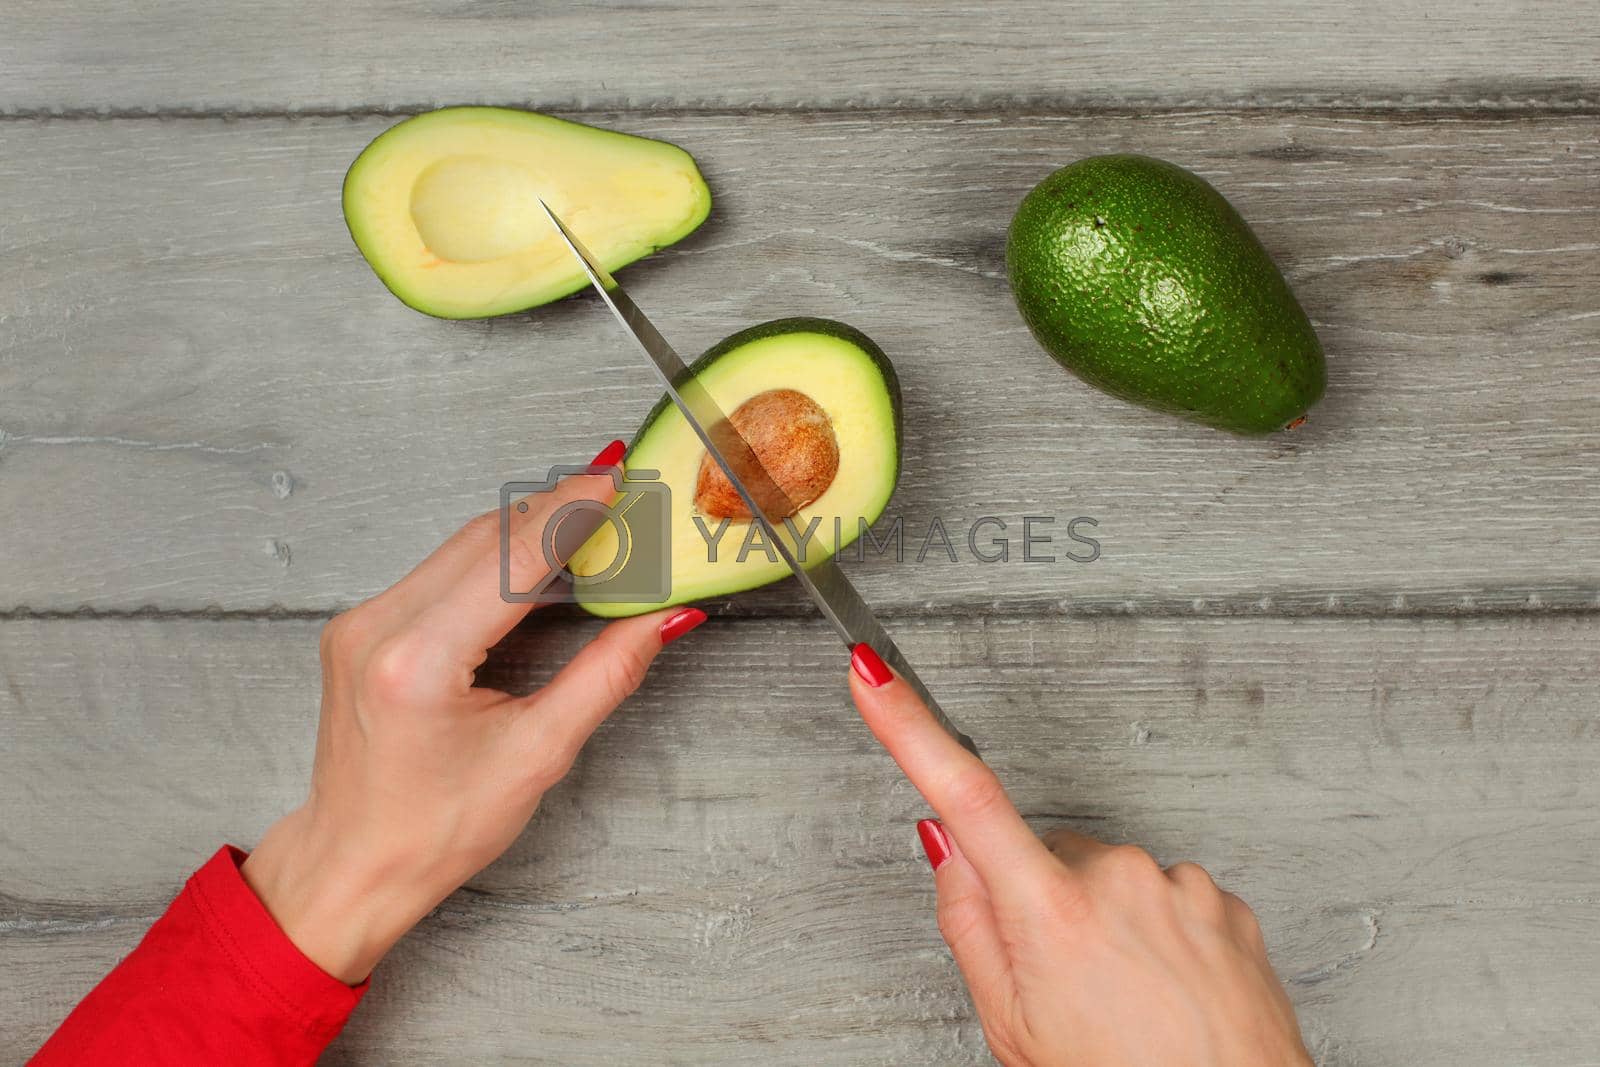 Royalty free image of Tabletop view - woman hands holding chef knife, removing seed from avocado cut in half. by Ivanko